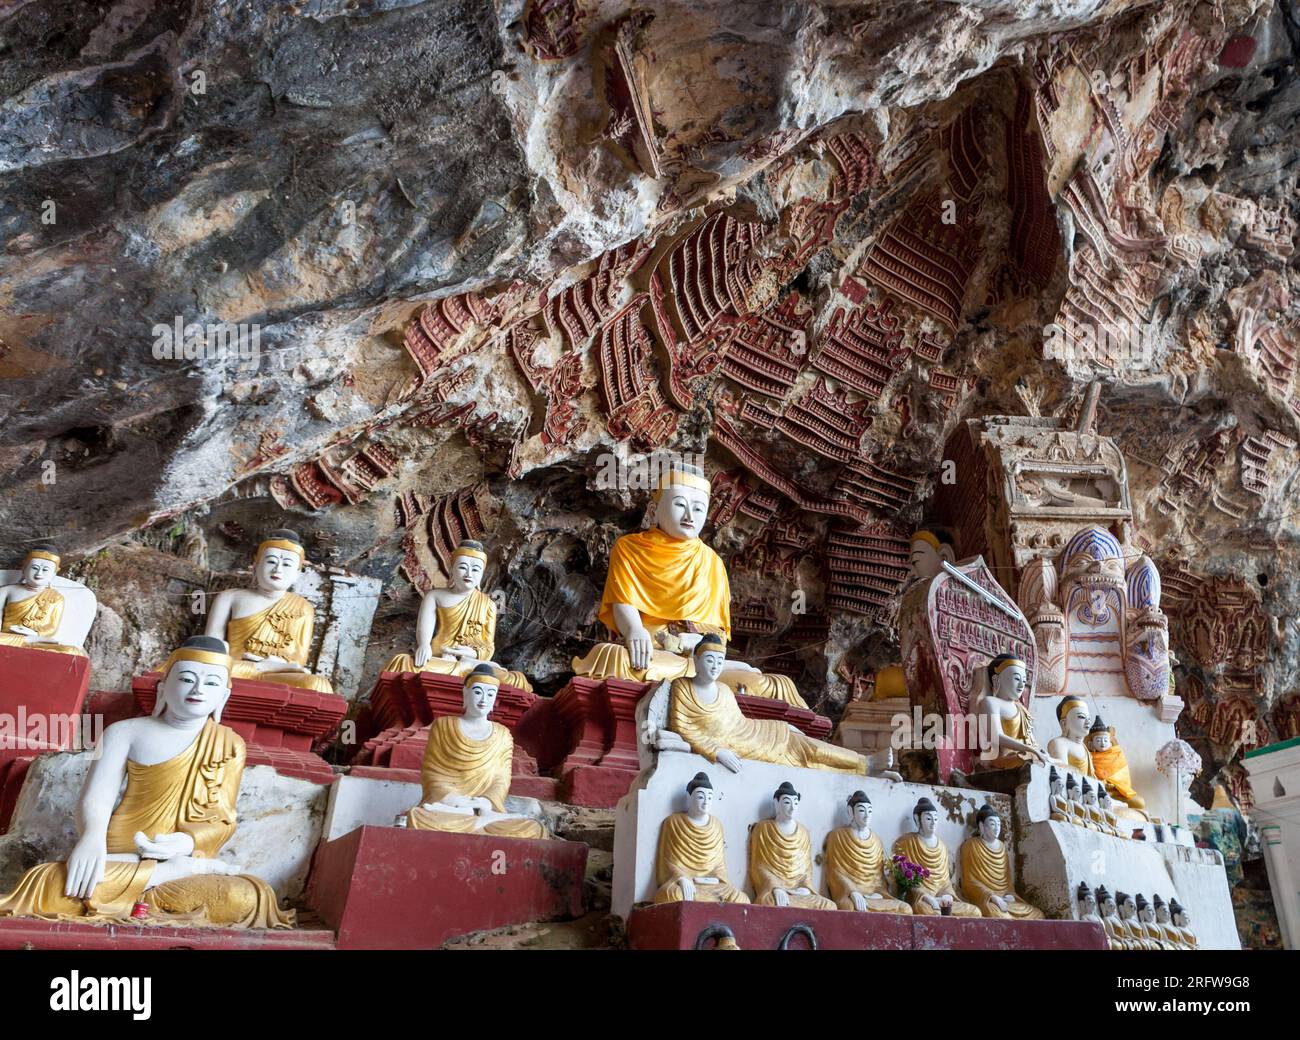 Old temple with buddha statues in Kaw Goon cave. Myanmar. Stock Photo